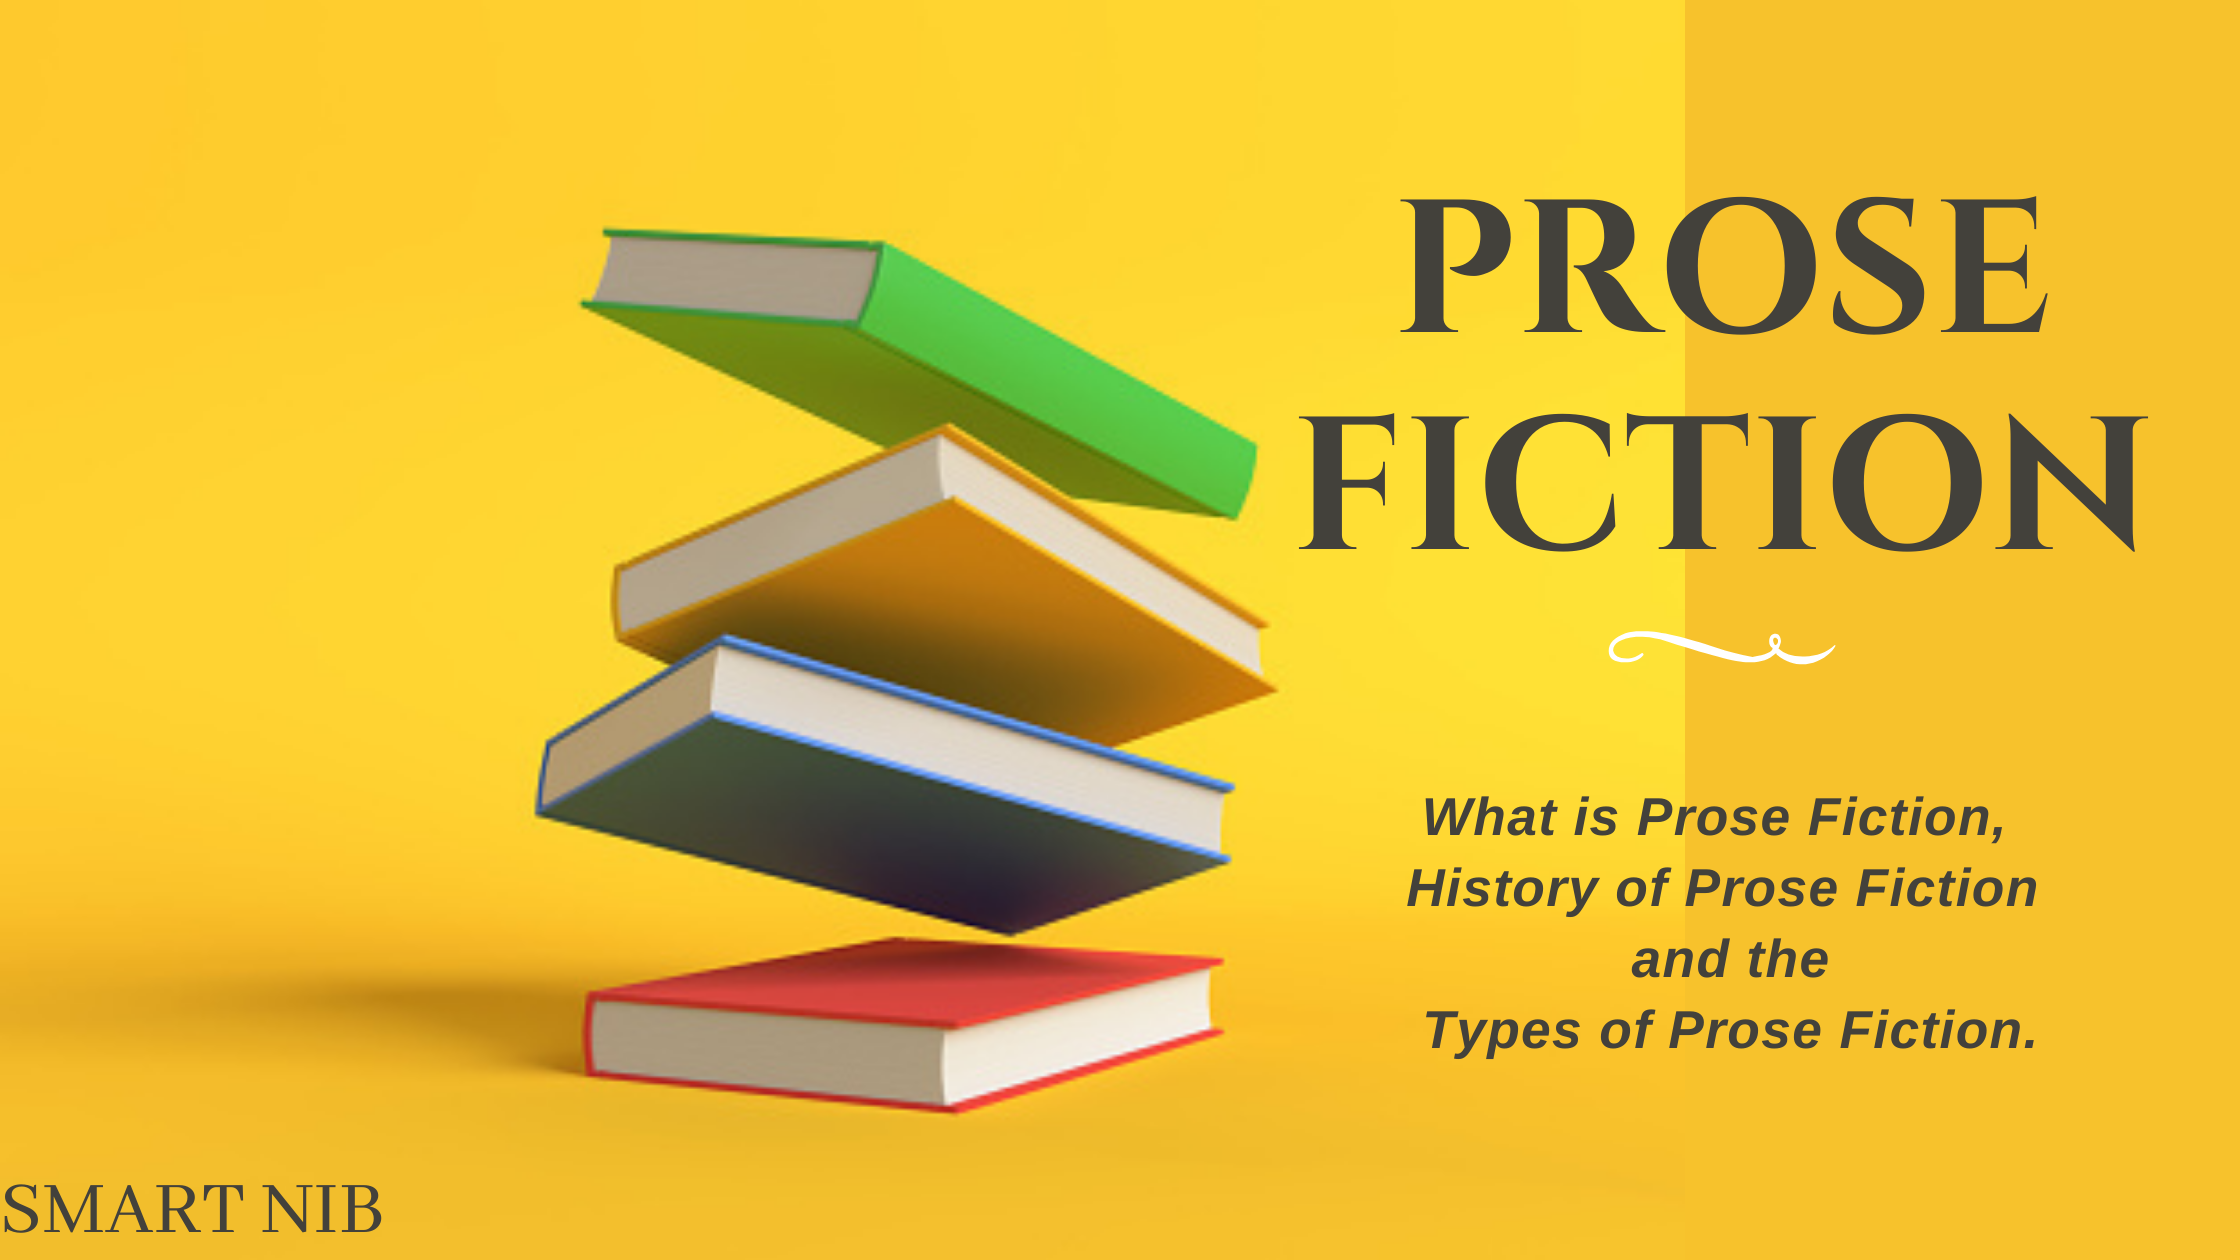 What is Prose Fiction, History/Origin of Prose Fiction, and Types of Prose Fiction